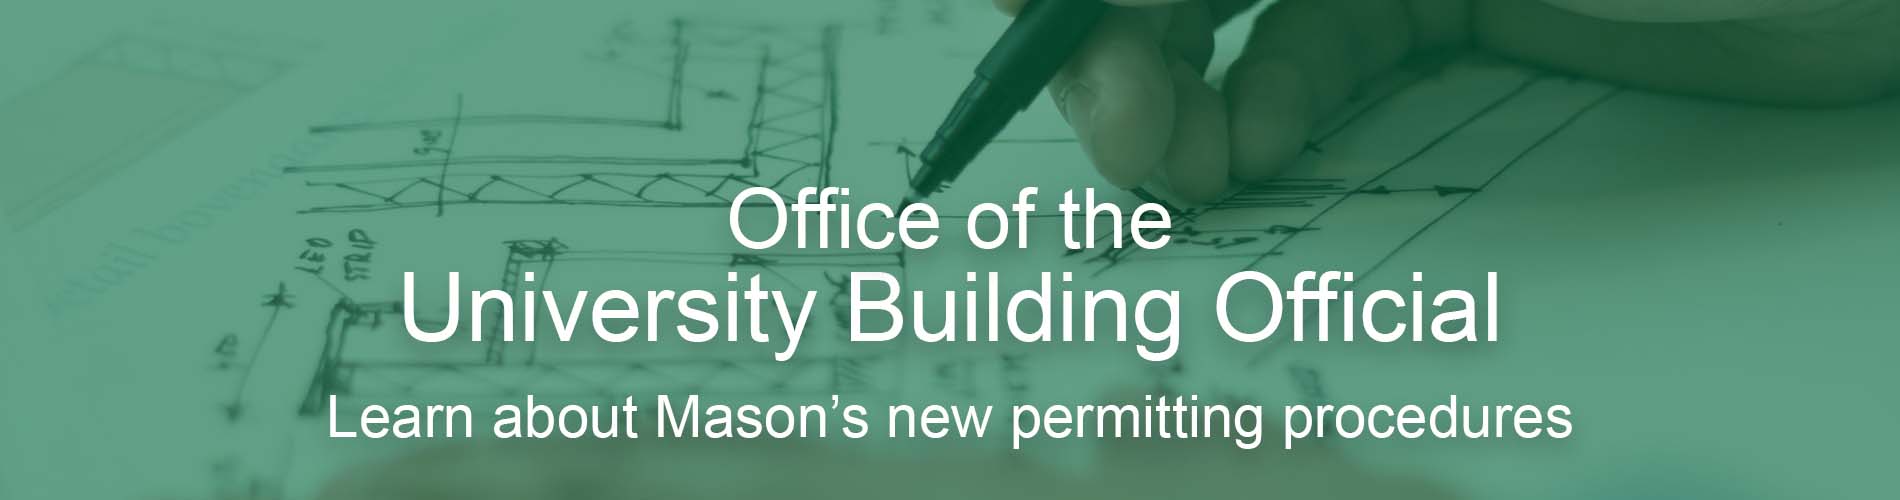 Office of University Building Official